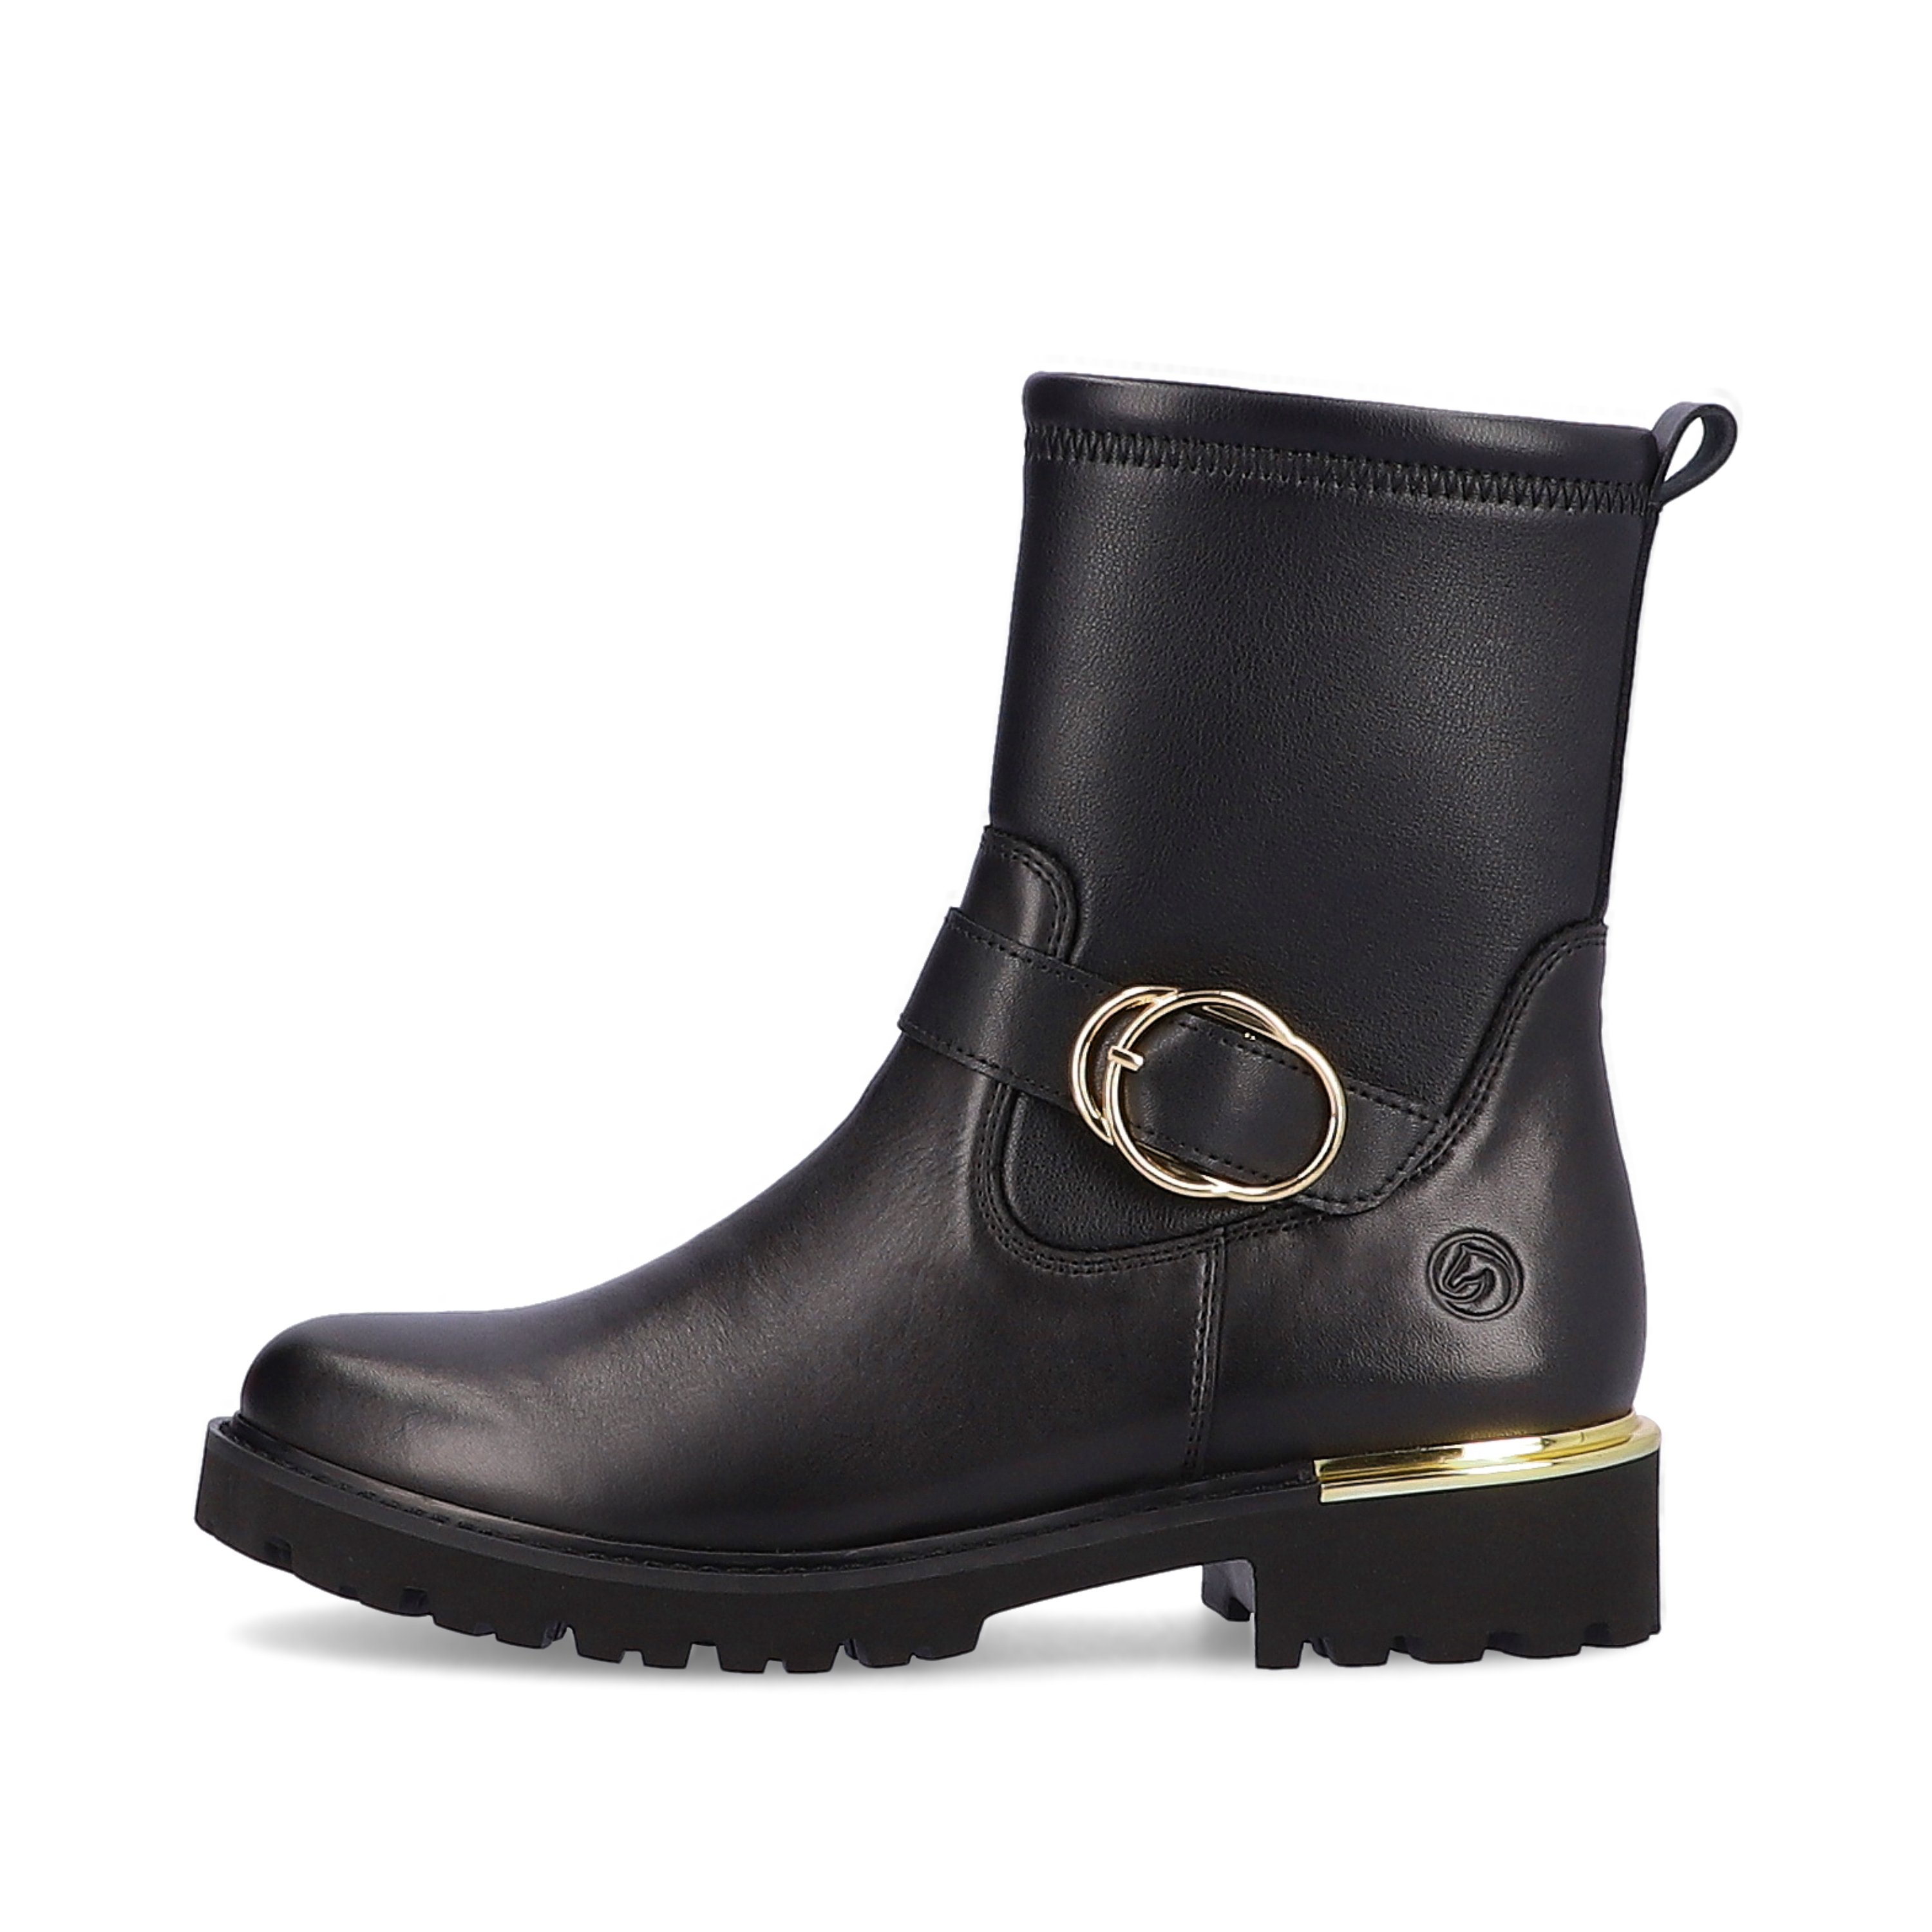 Night black remonte women´s biker boots D8666-01 with especially light sole. The outside of the shoe